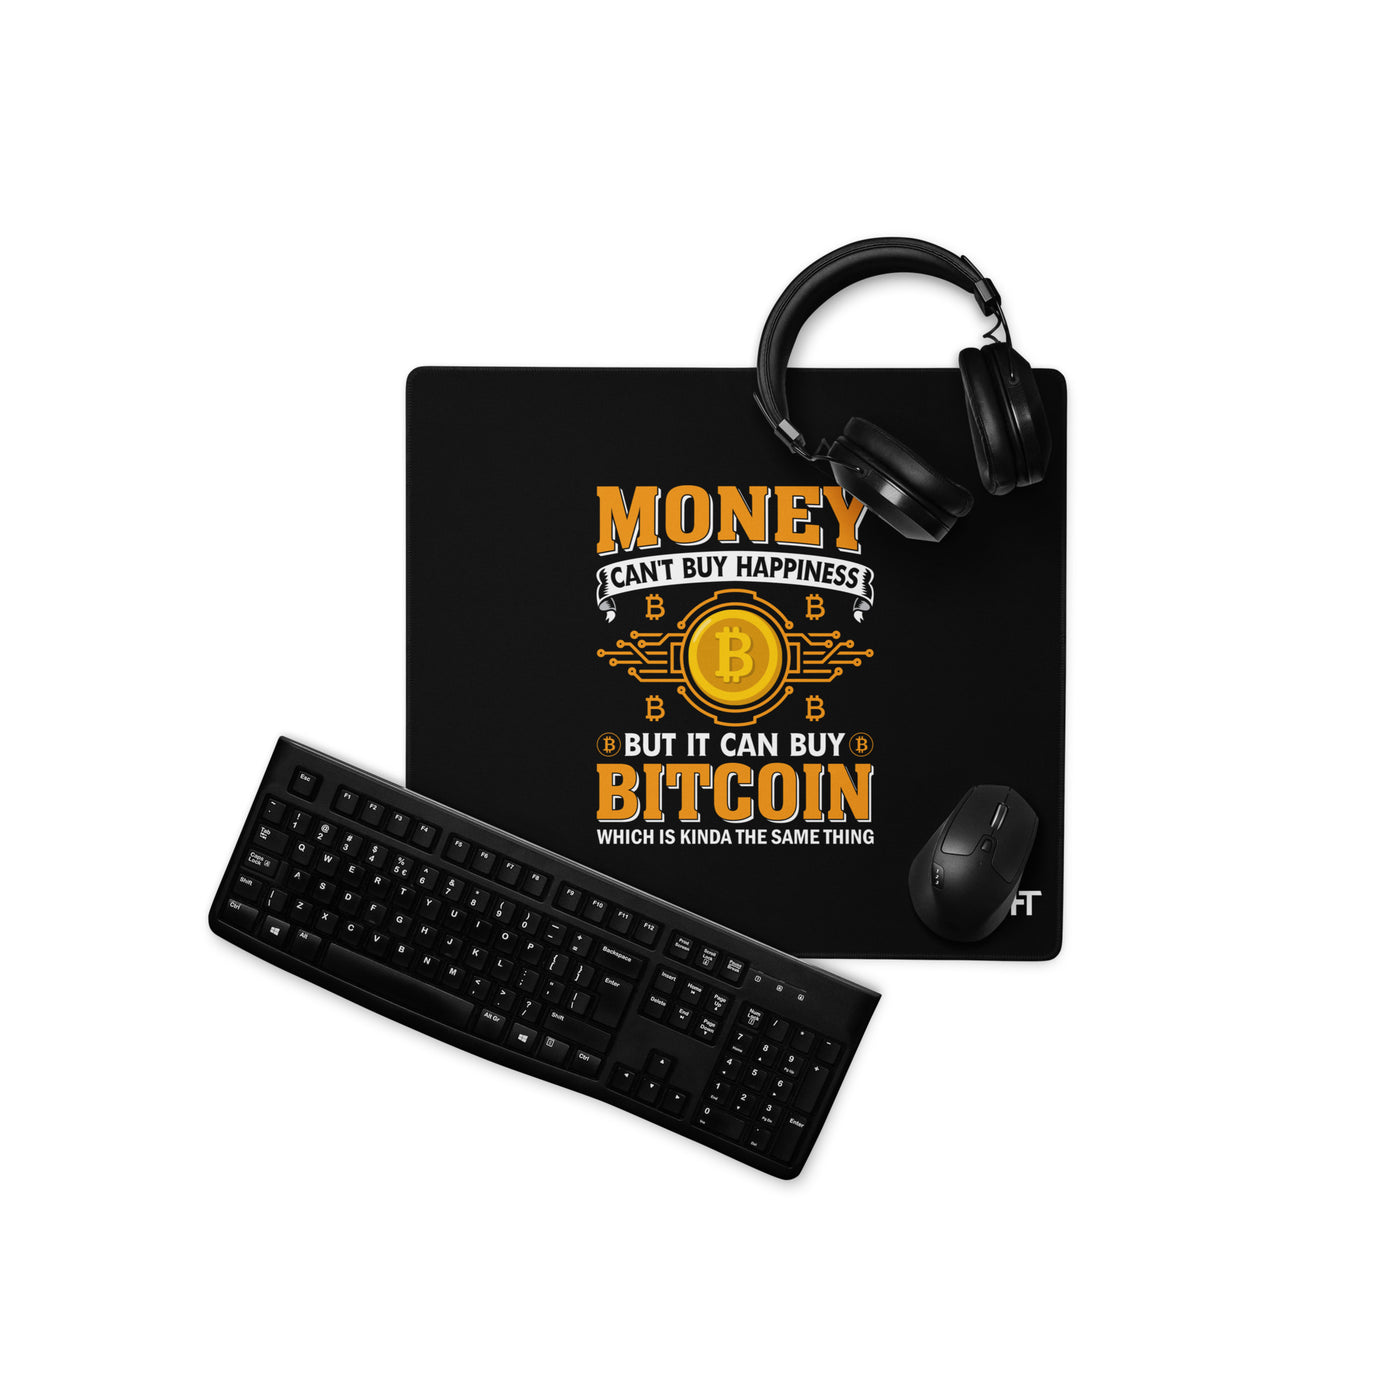 Money can't Buy you Happiness but it can Buy Bitcoin - Desk Mat